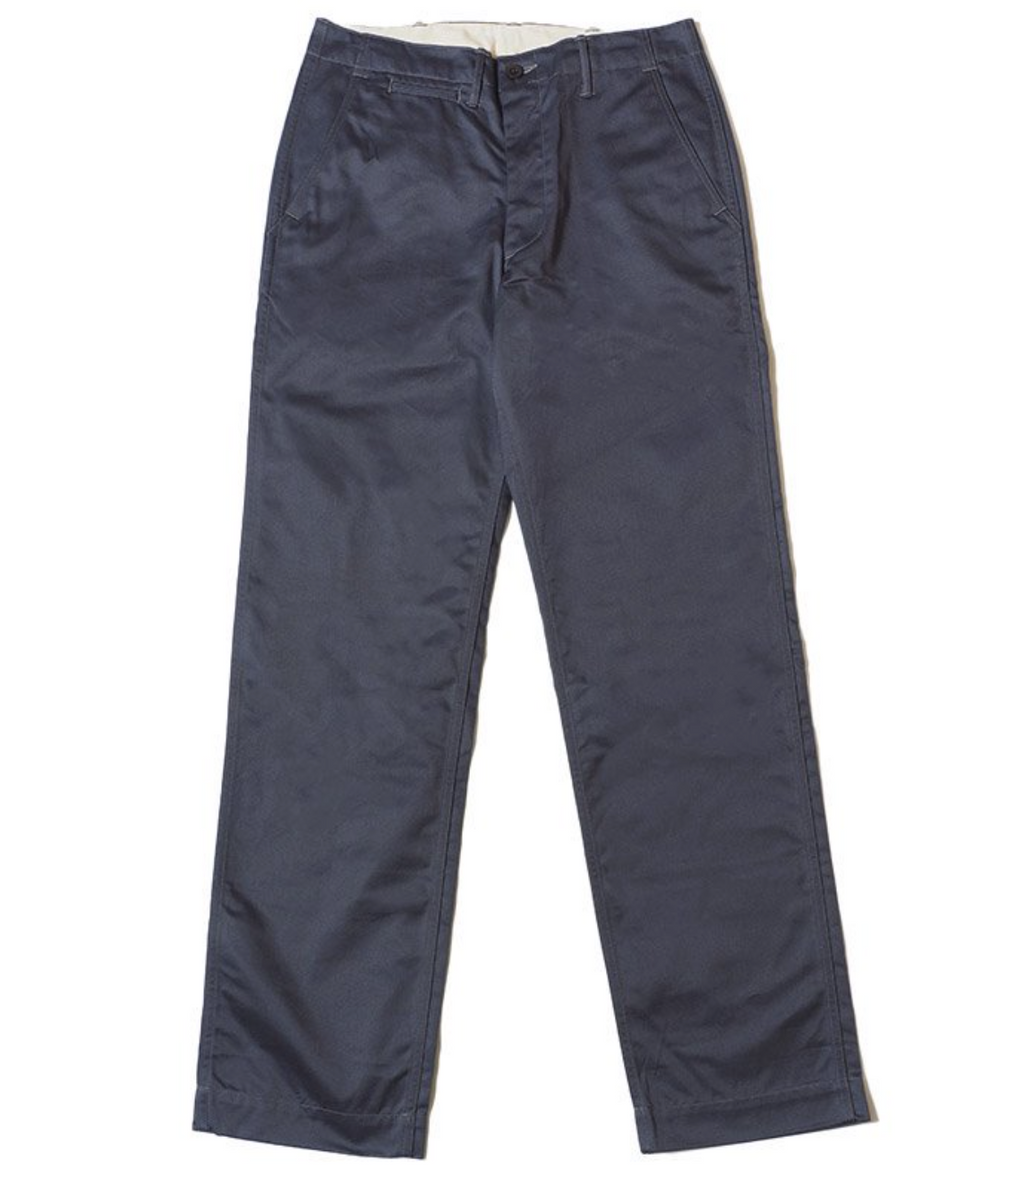 Warehouse & Co. Lot 1082 Duck Digger Chinos - Blue Gray